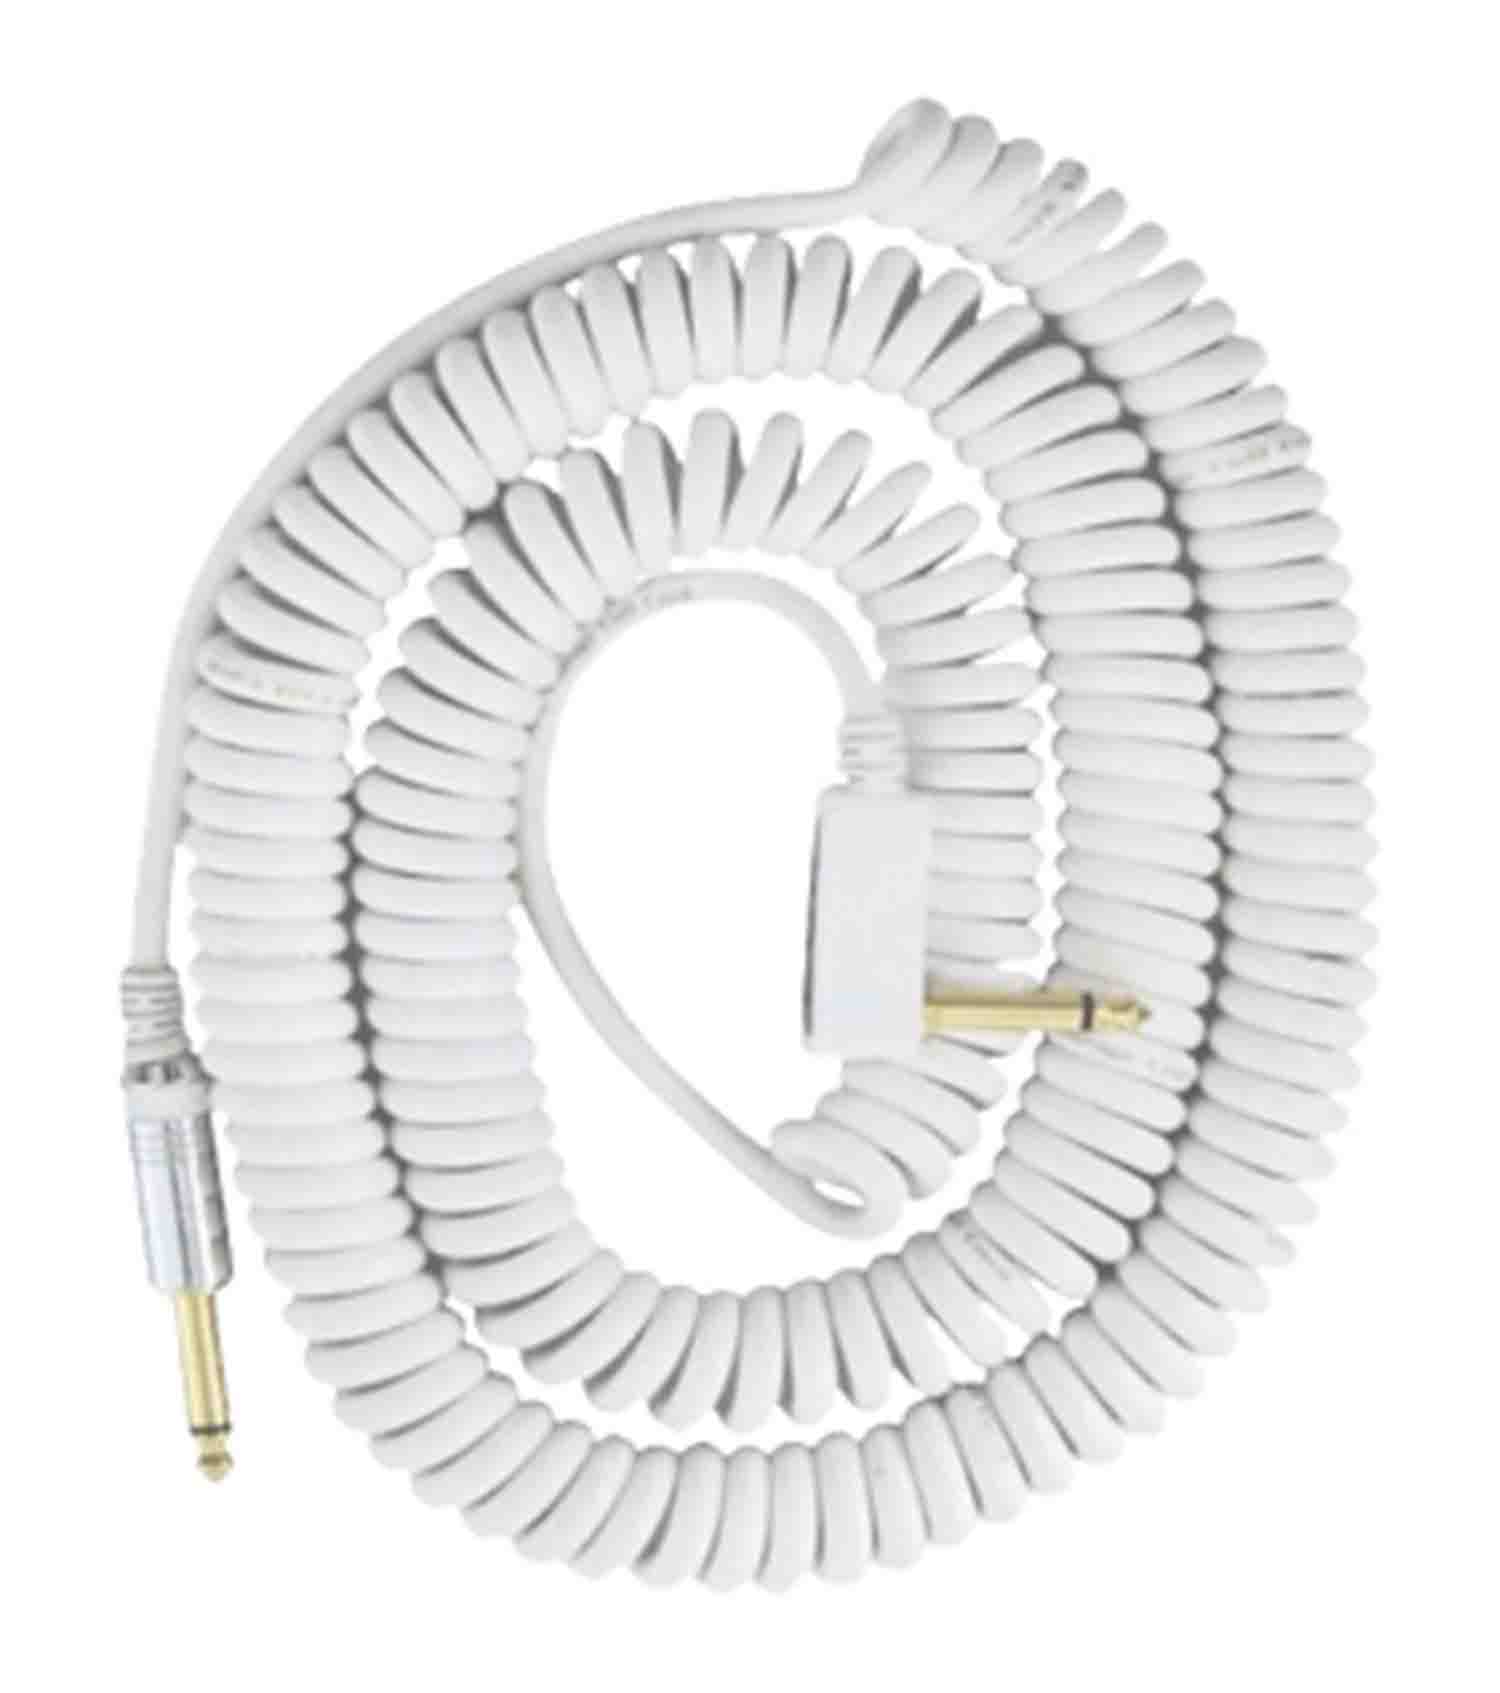 Korg Vintage Coiled Guitar Cable High-Quality 29.5' Cable with Mesh Bag - White - Hollywood DJ